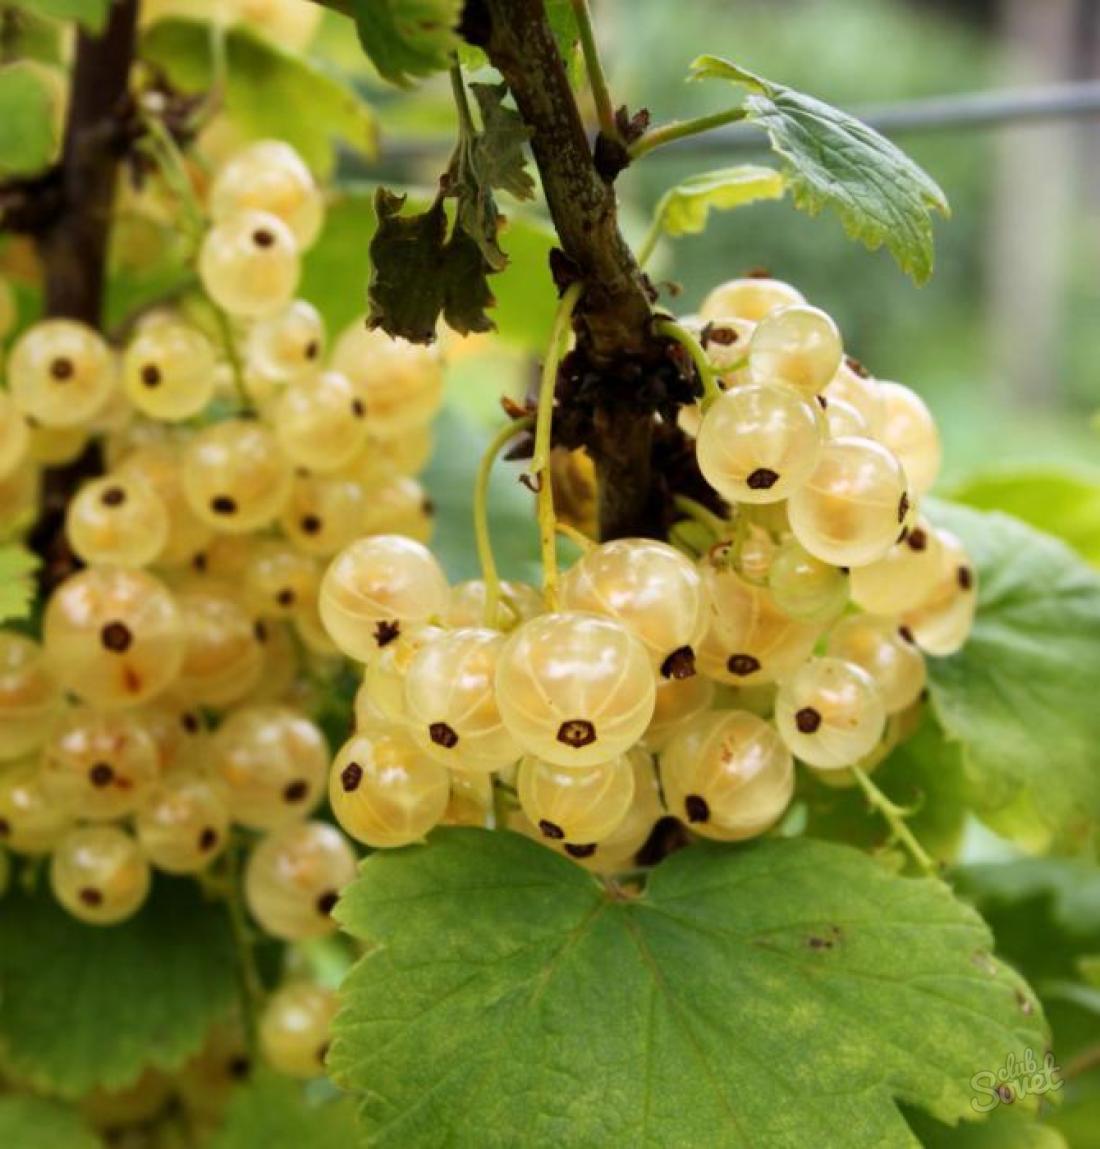 What can be made of white currant?